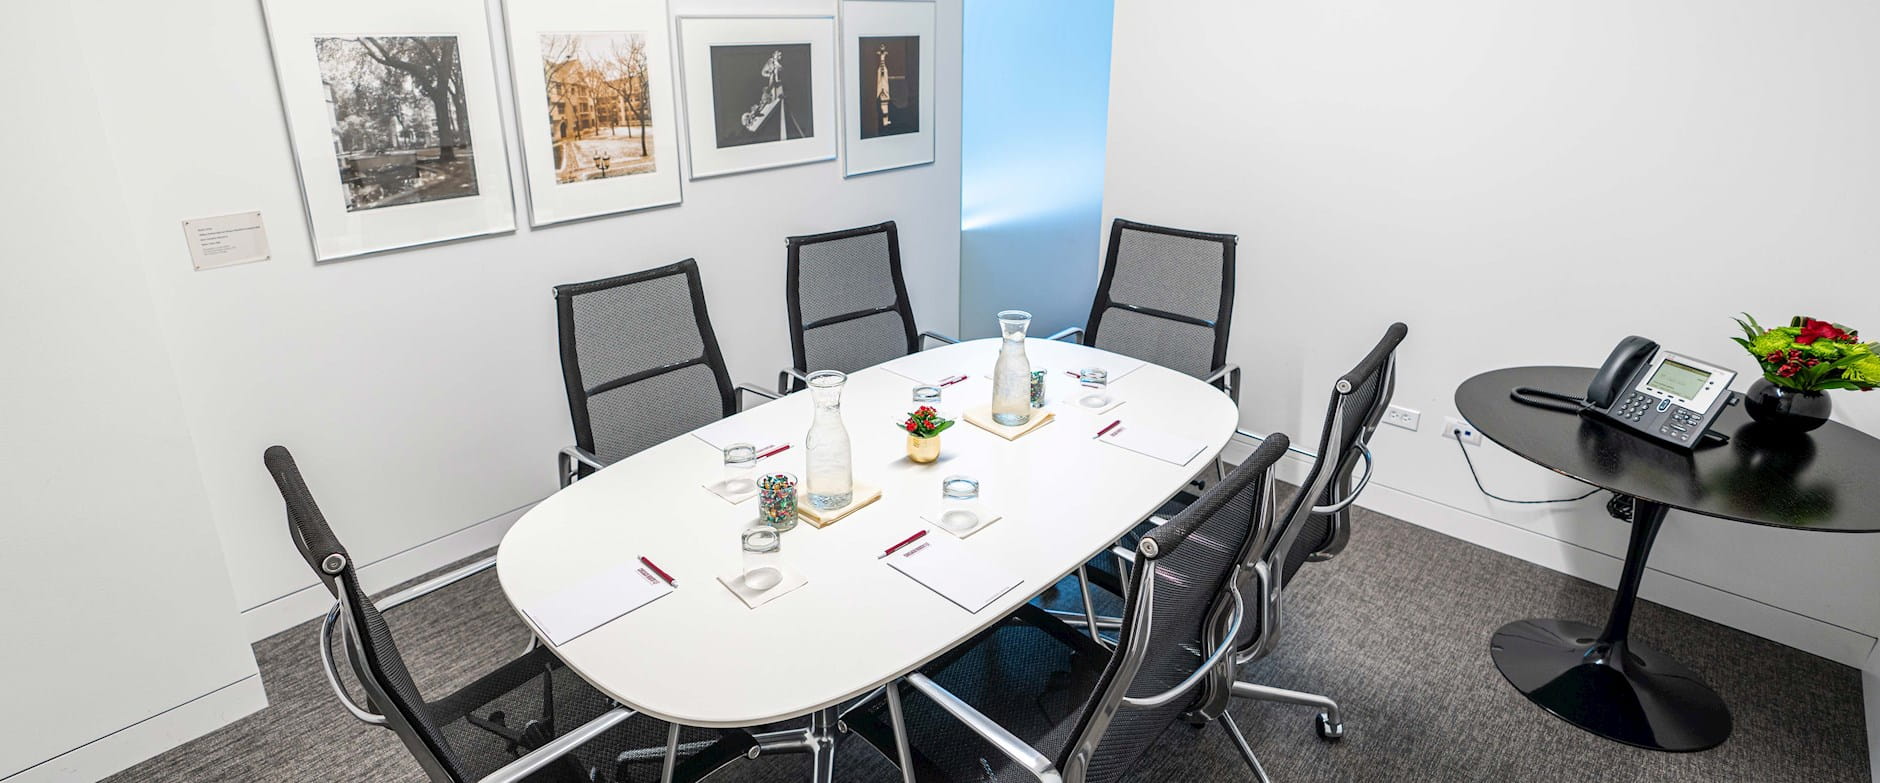 Small boardroom with a six-person table set with notepads